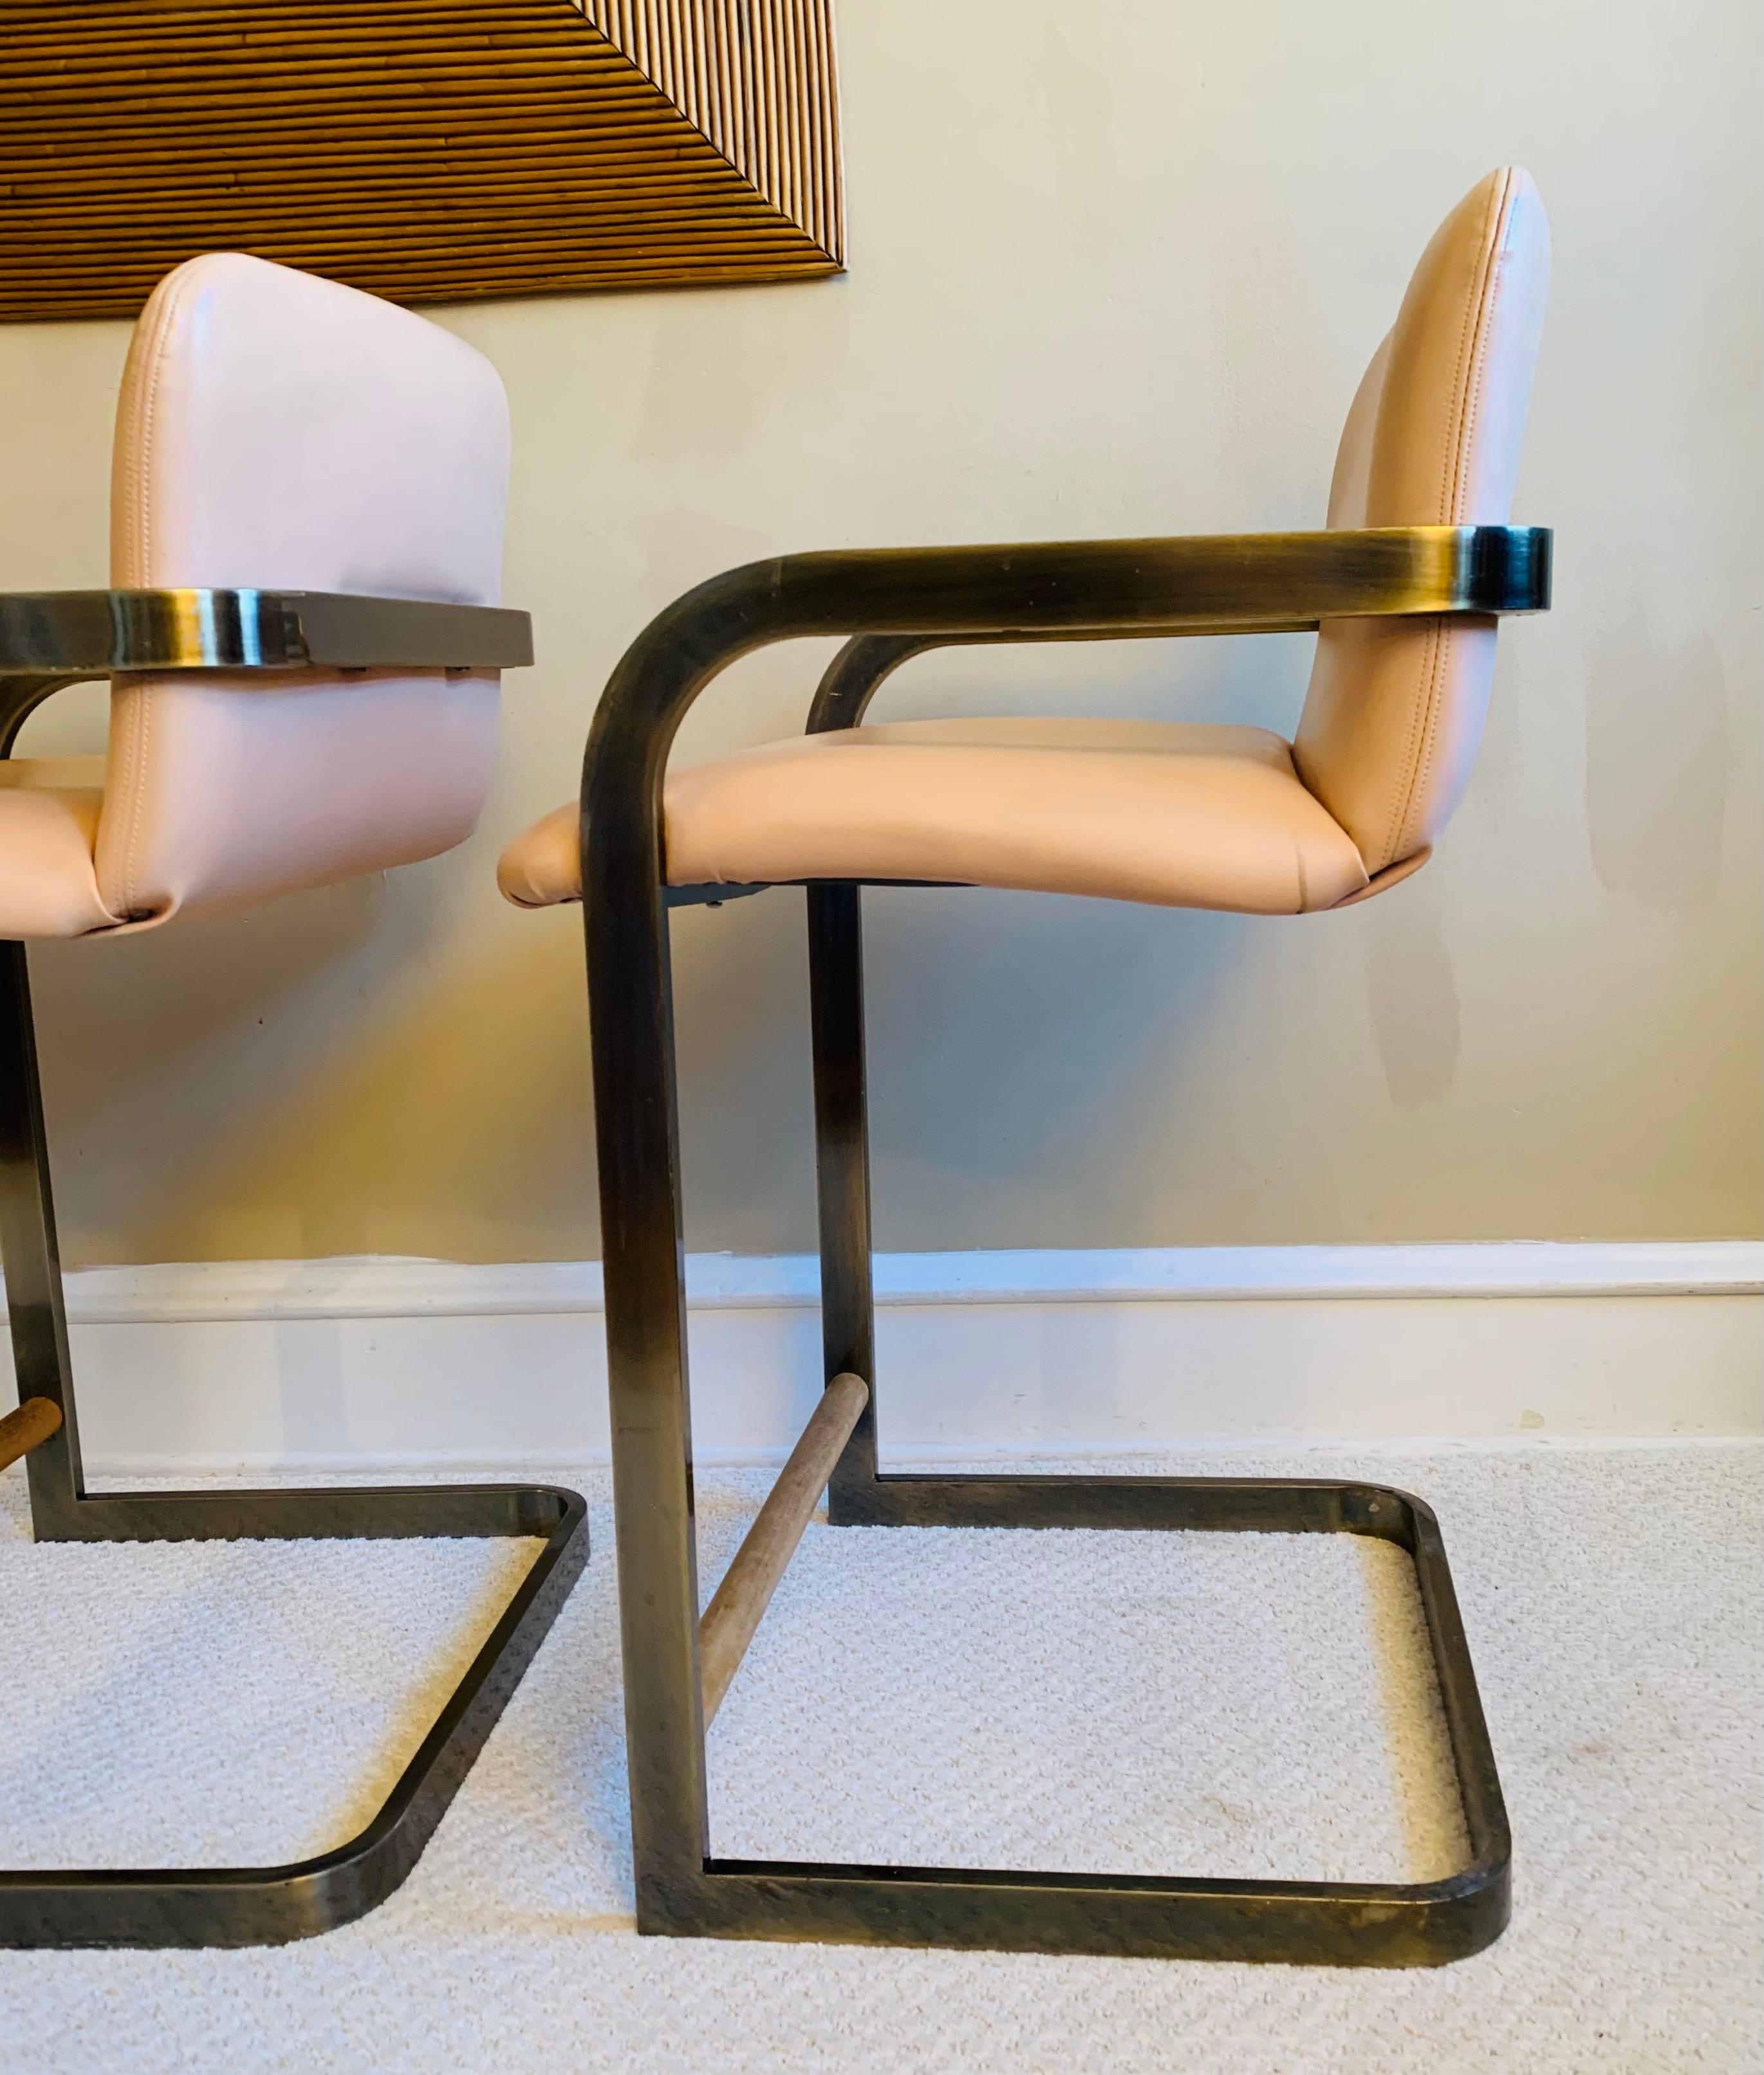 Late 20th Century Vintage Midcentury Cantilever Stools in the Milo Baughman Style by D.I.A. 1980's